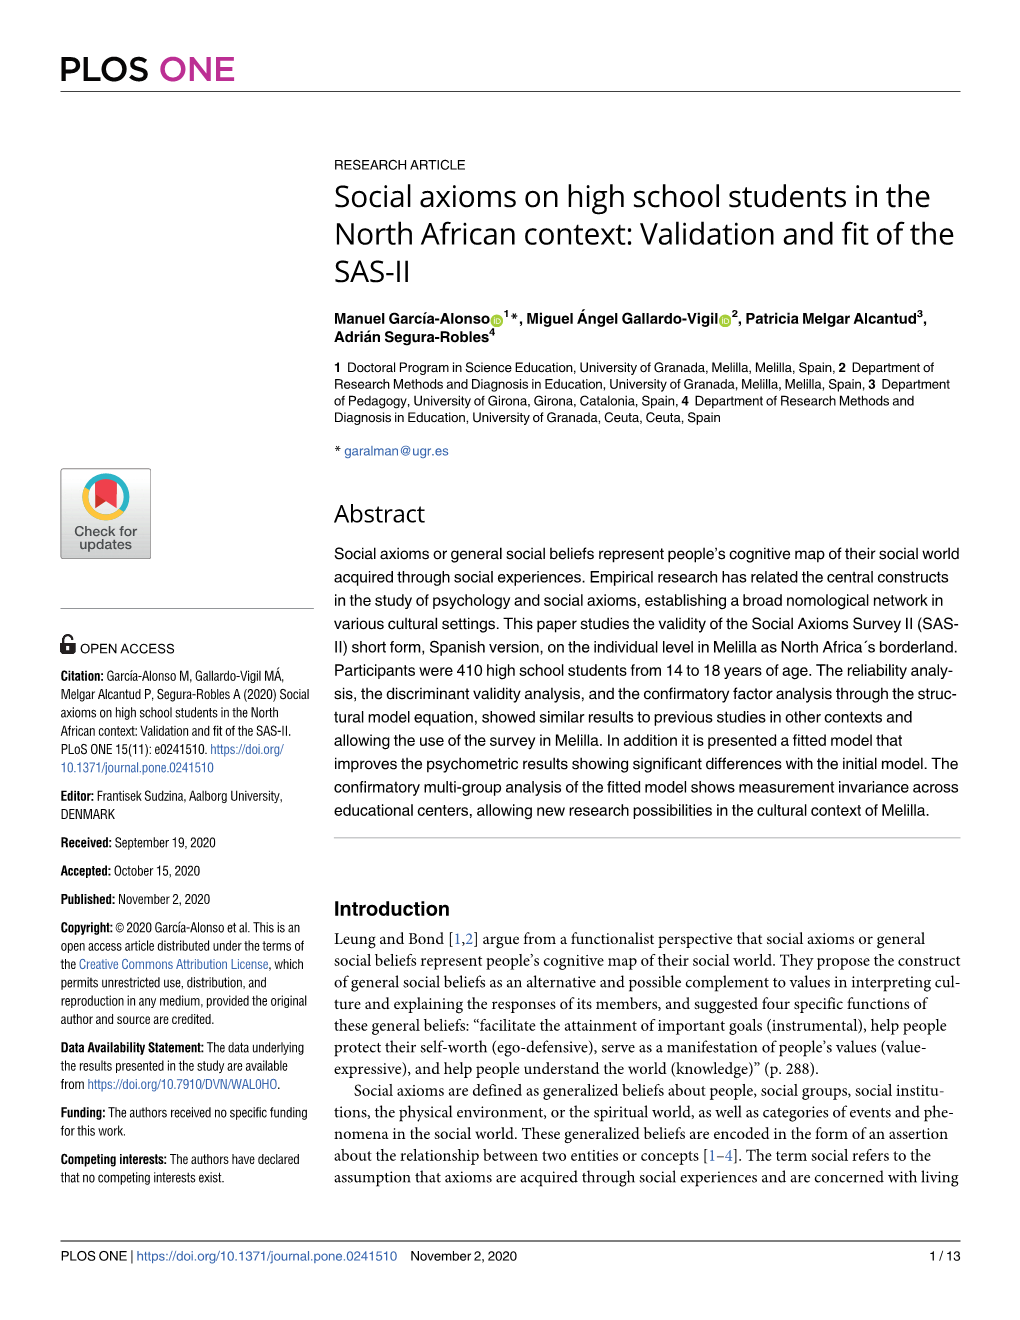 Social Axioms on High School Students in the North African Context: Validation and Fit of the SAS-II